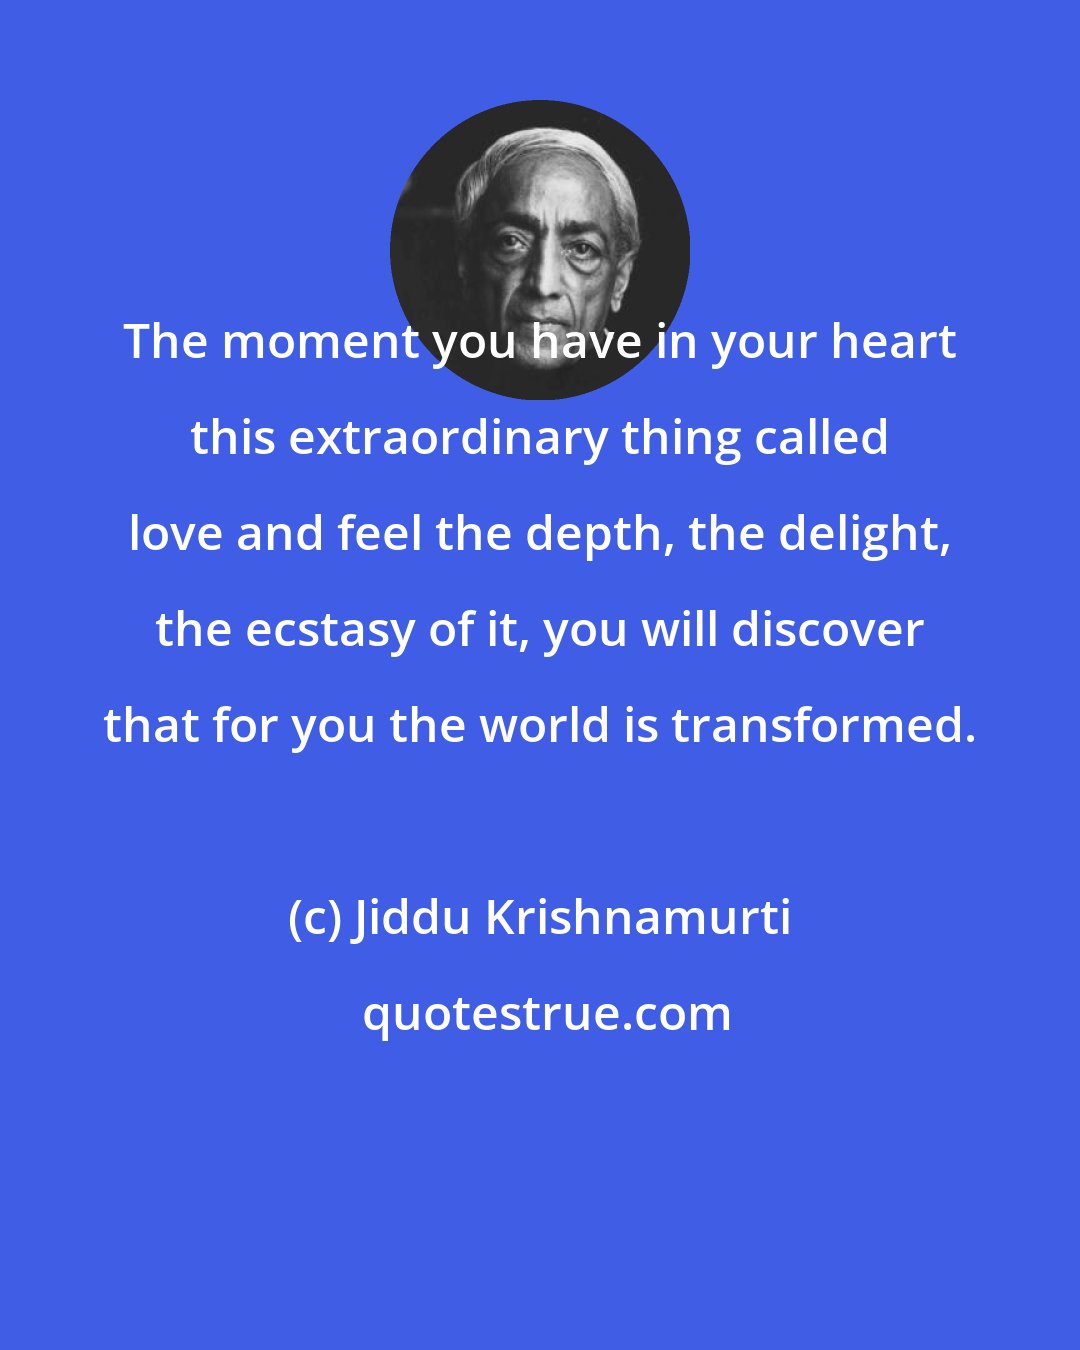 Jiddu Krishnamurti: The moment you have in your heart this extraordinary thing called love and feel the depth, the delight, the ecstasy of it, you will discover that for you the world is transformed.